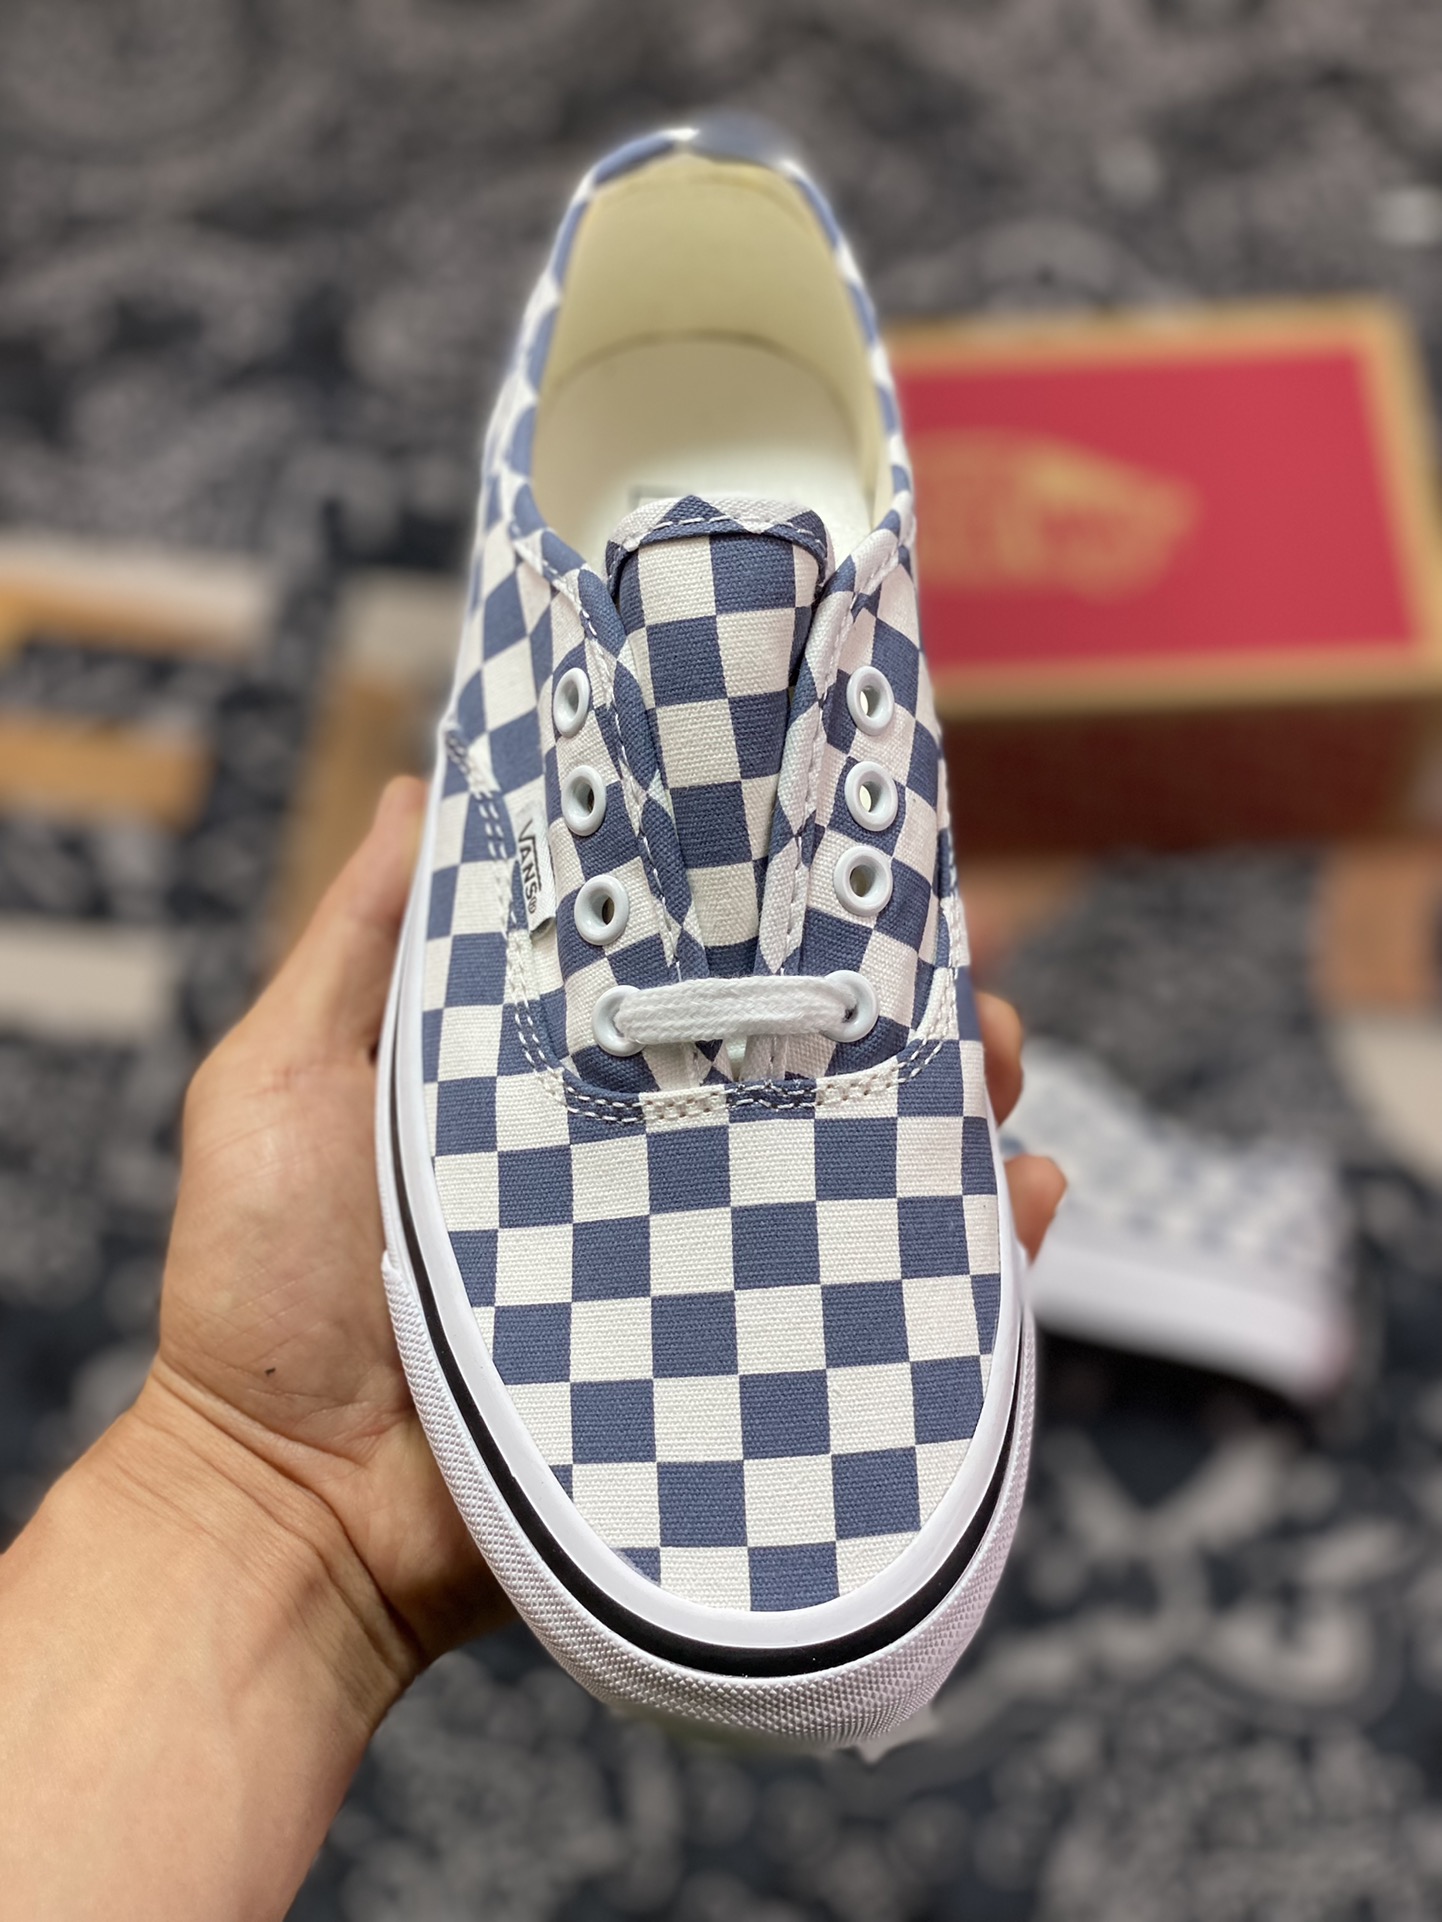 Vans Authentic 44 DX Grey and White Checkerboard Sneakers